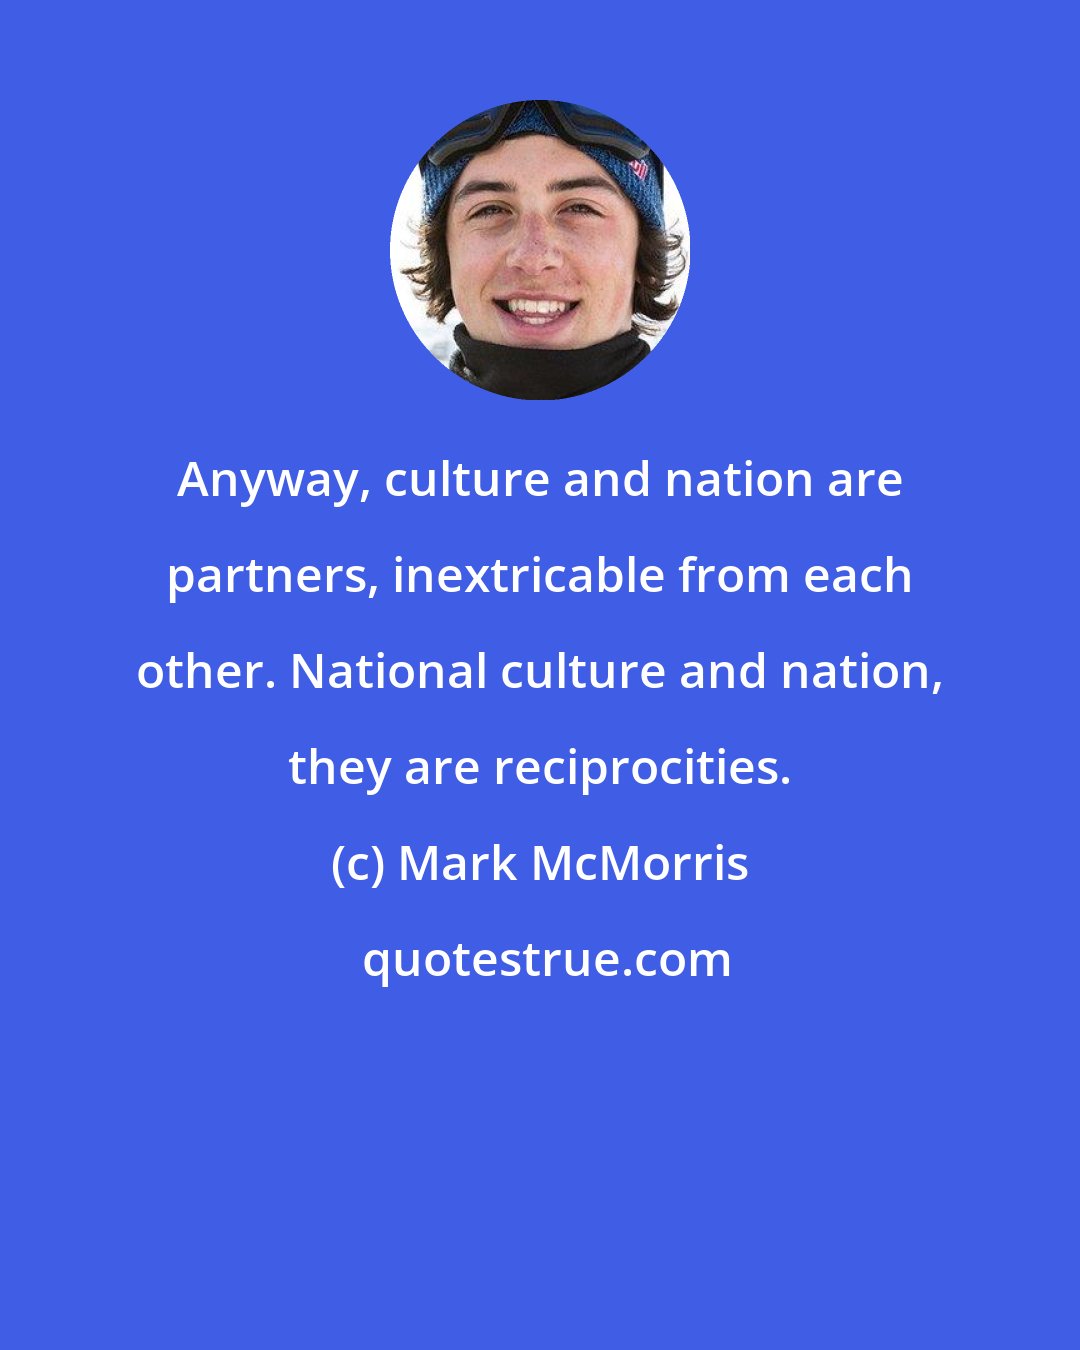 Mark McMorris: Anyway, culture and nation are partners, inextricable from each other. National culture and nation, they are reciprocities.